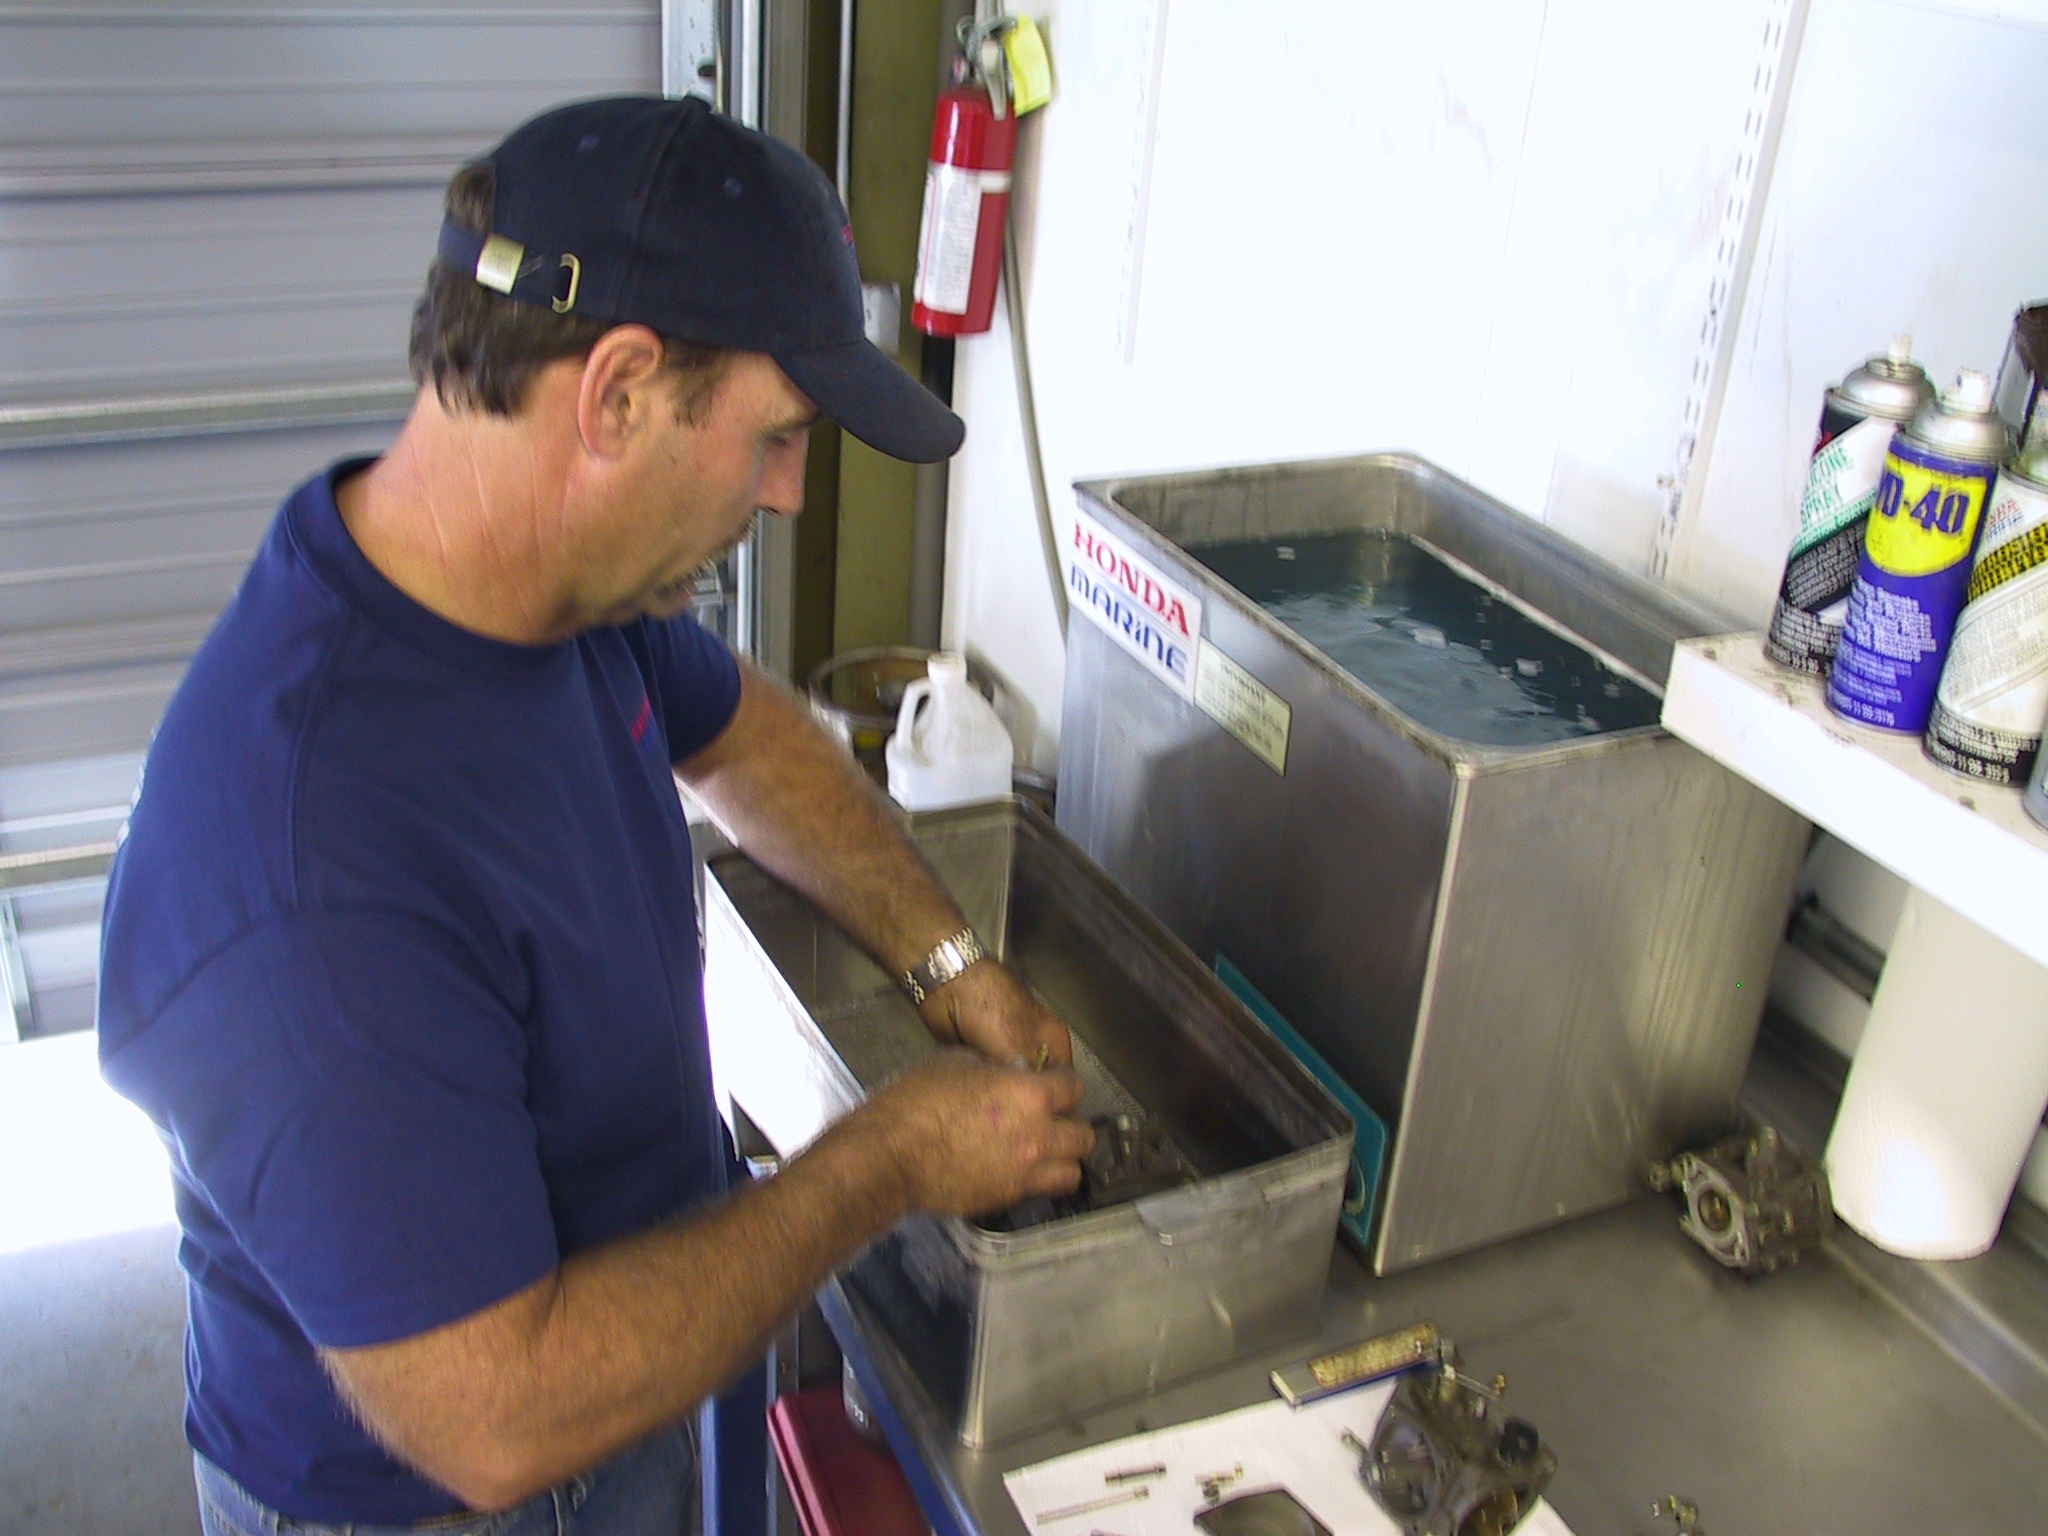 Boat repair shop finds solution for clogged carburetors | Boating Industry